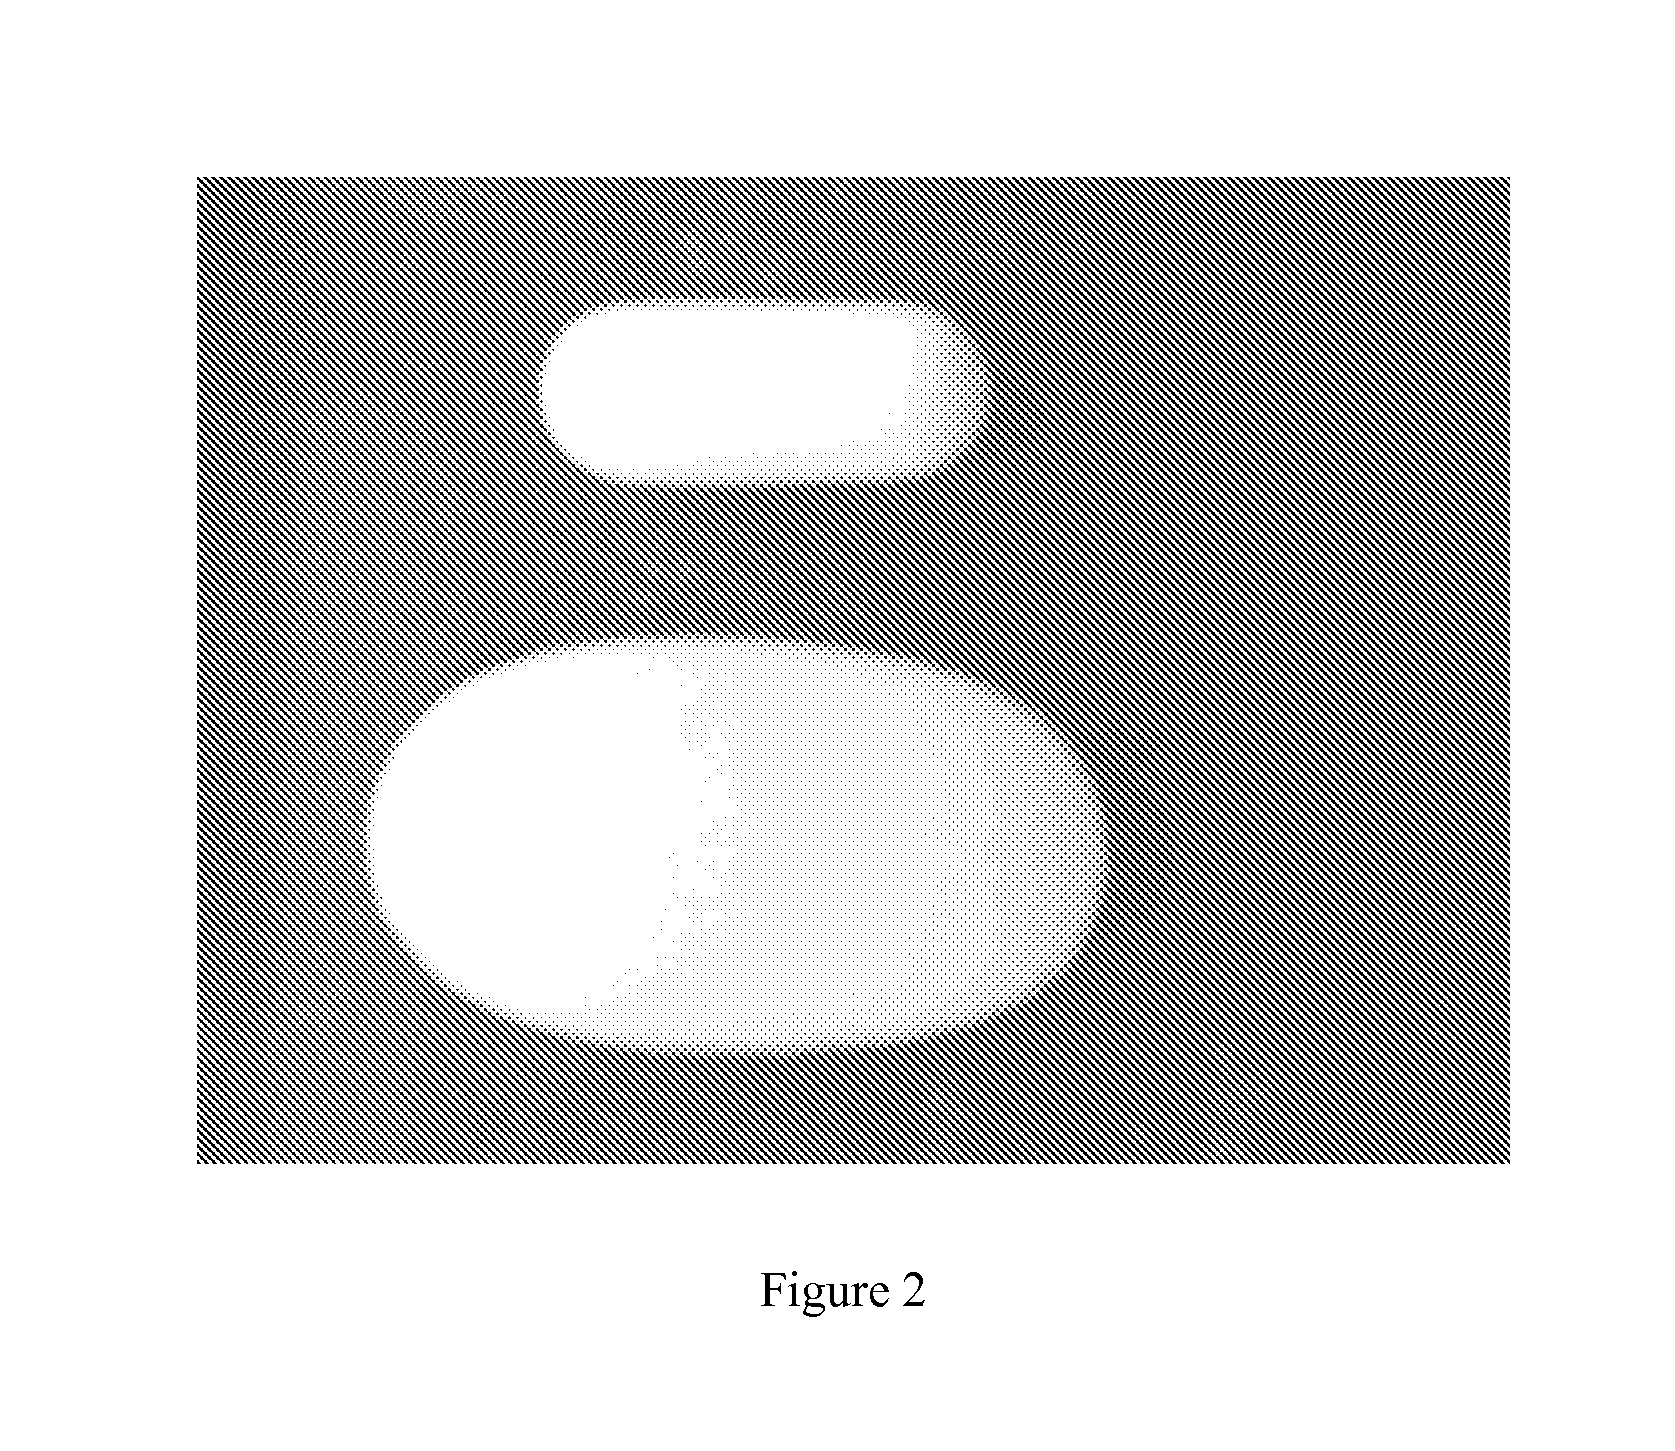 Method of treating a disease condition susceptible to baclofen therapy